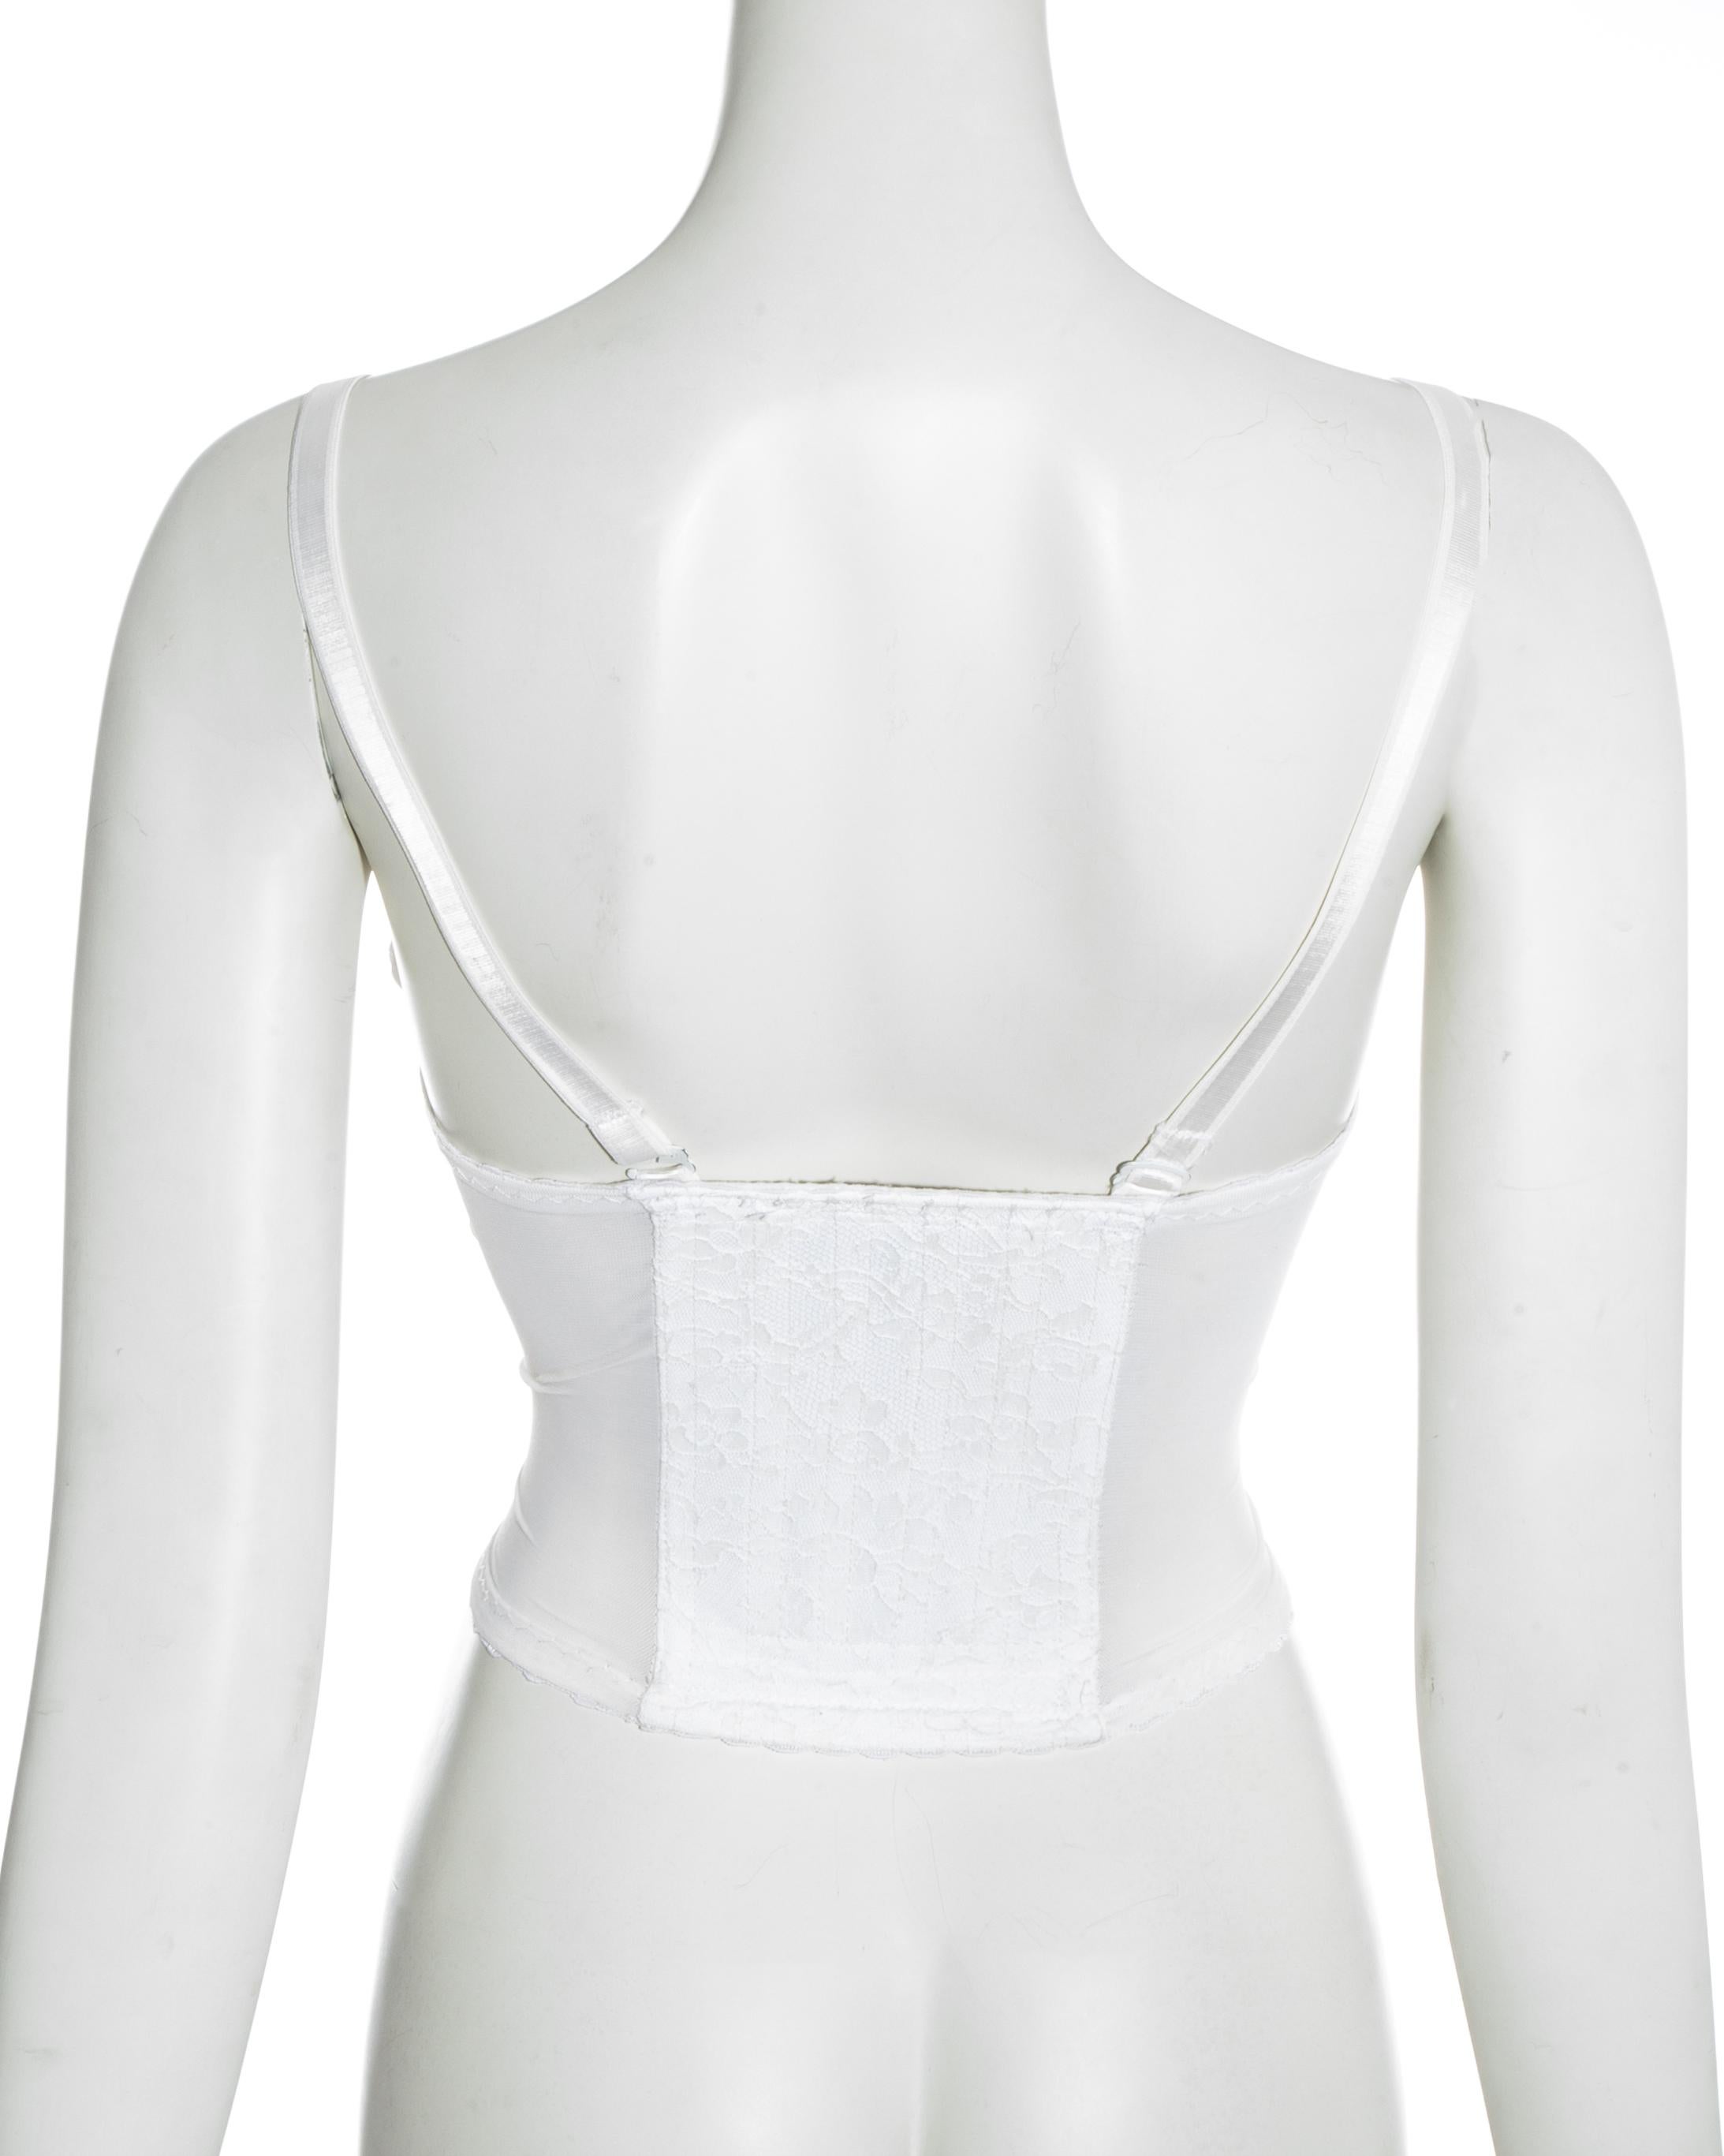 Women's Vivienne Westwood white lace corset with padded breast-cups, fw 1995